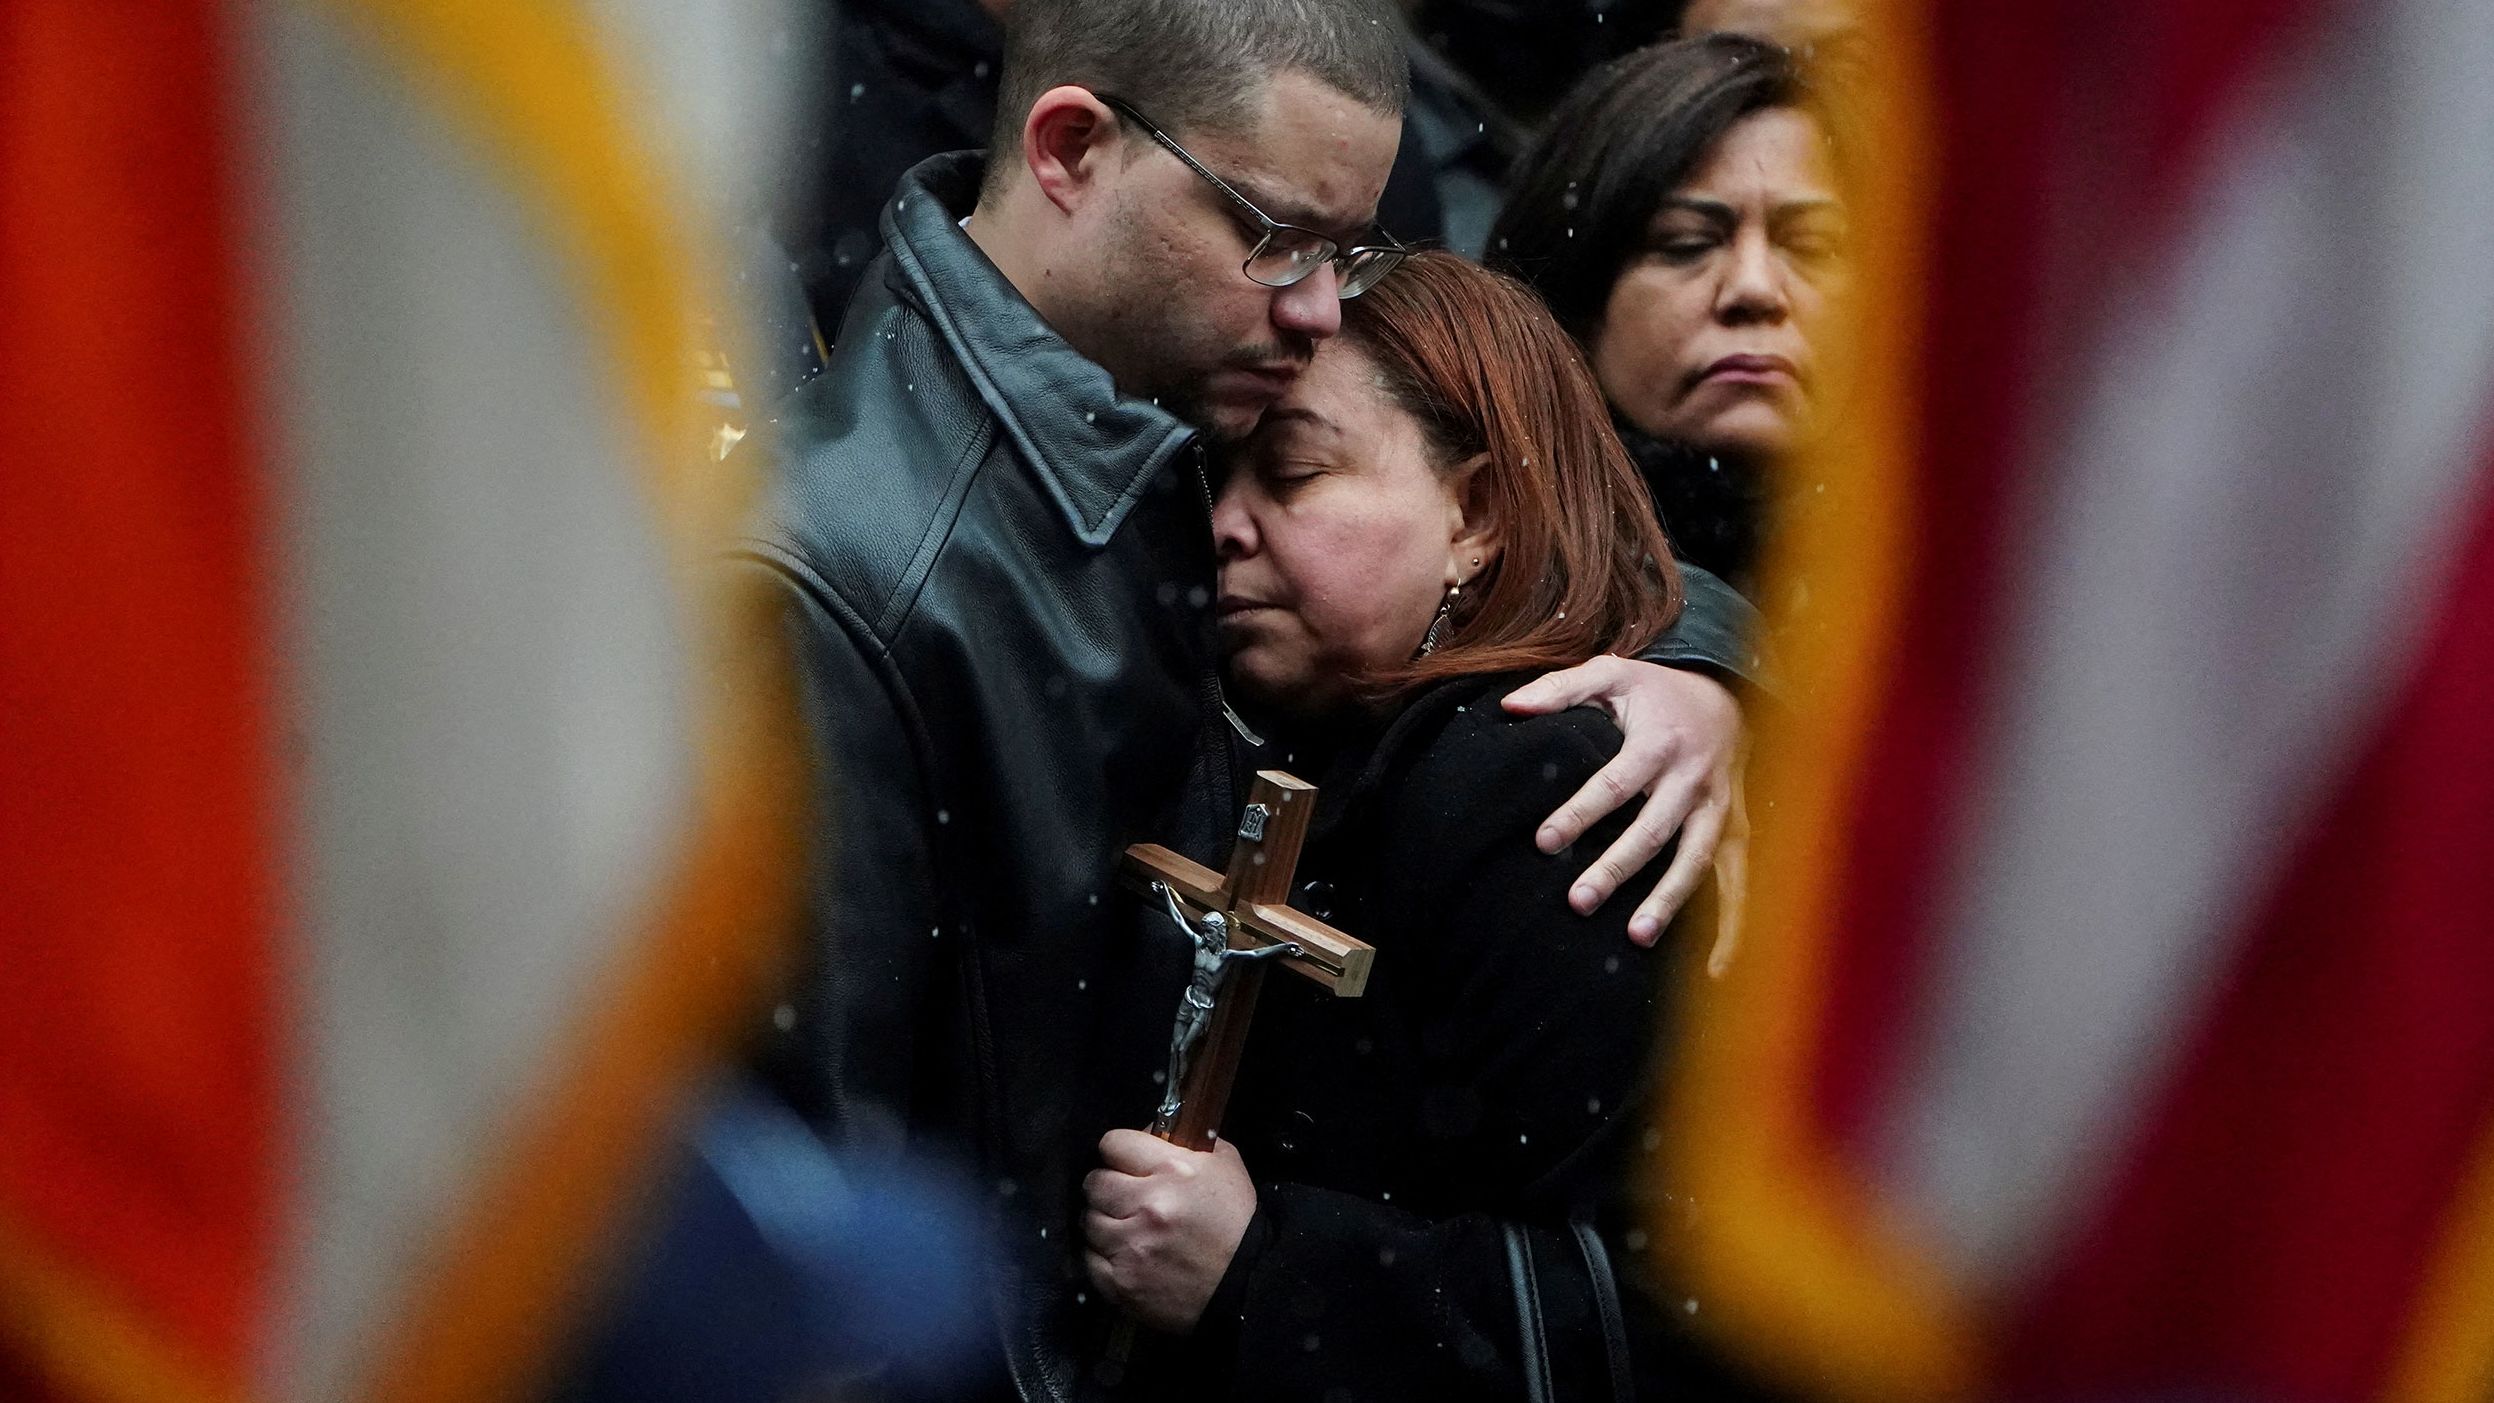 The mother of Officer Jason Rivera is comforted during Rivera's funeral service on Friday, January 28.